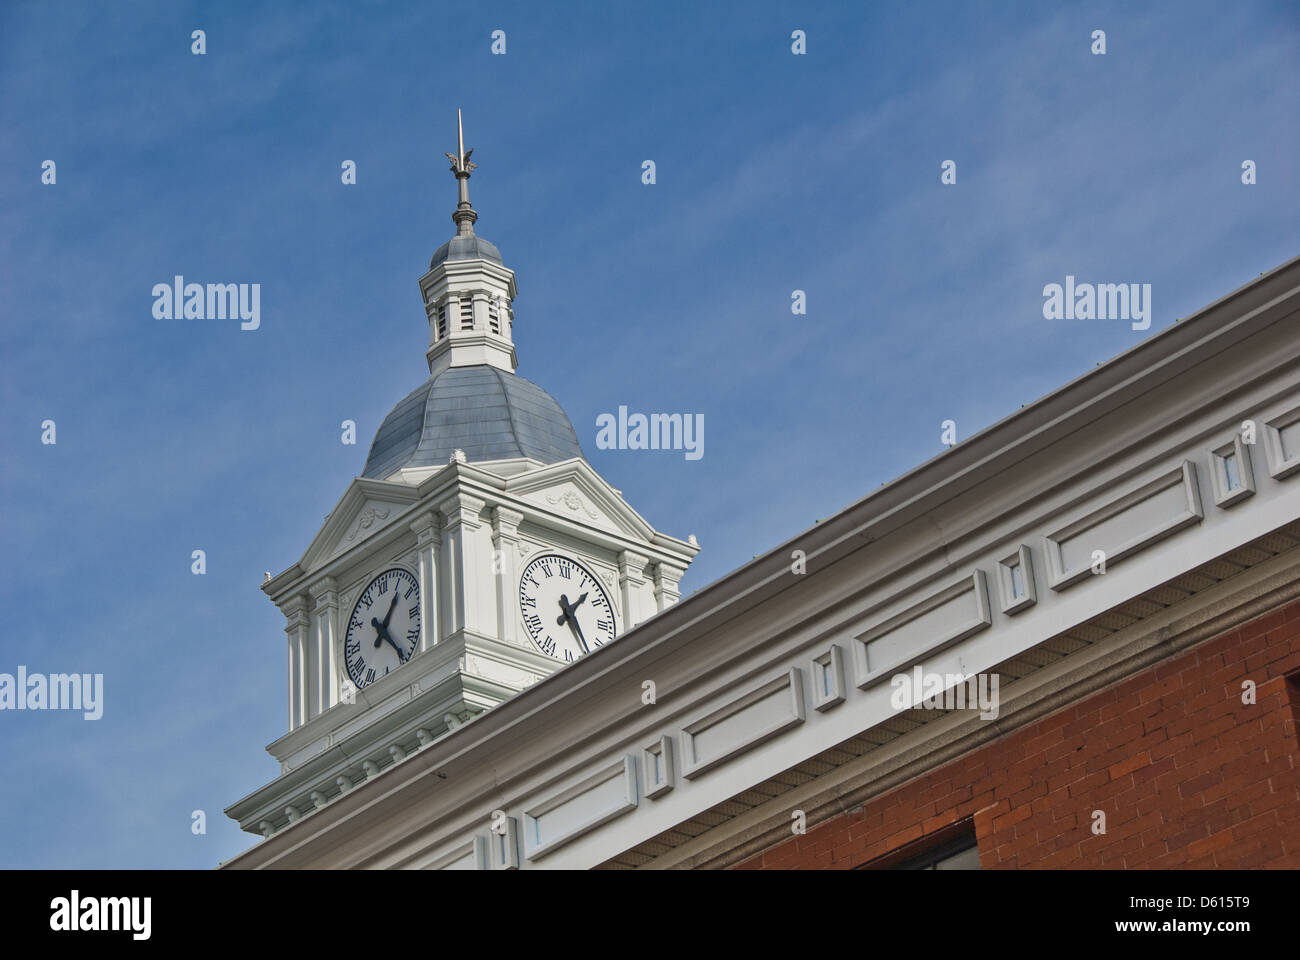 Clock tower on the Nassau County Courthouse, oldest courthouse in continuous use, Fernandina Beach, Amelia Island, Florida, USA Stock Photo